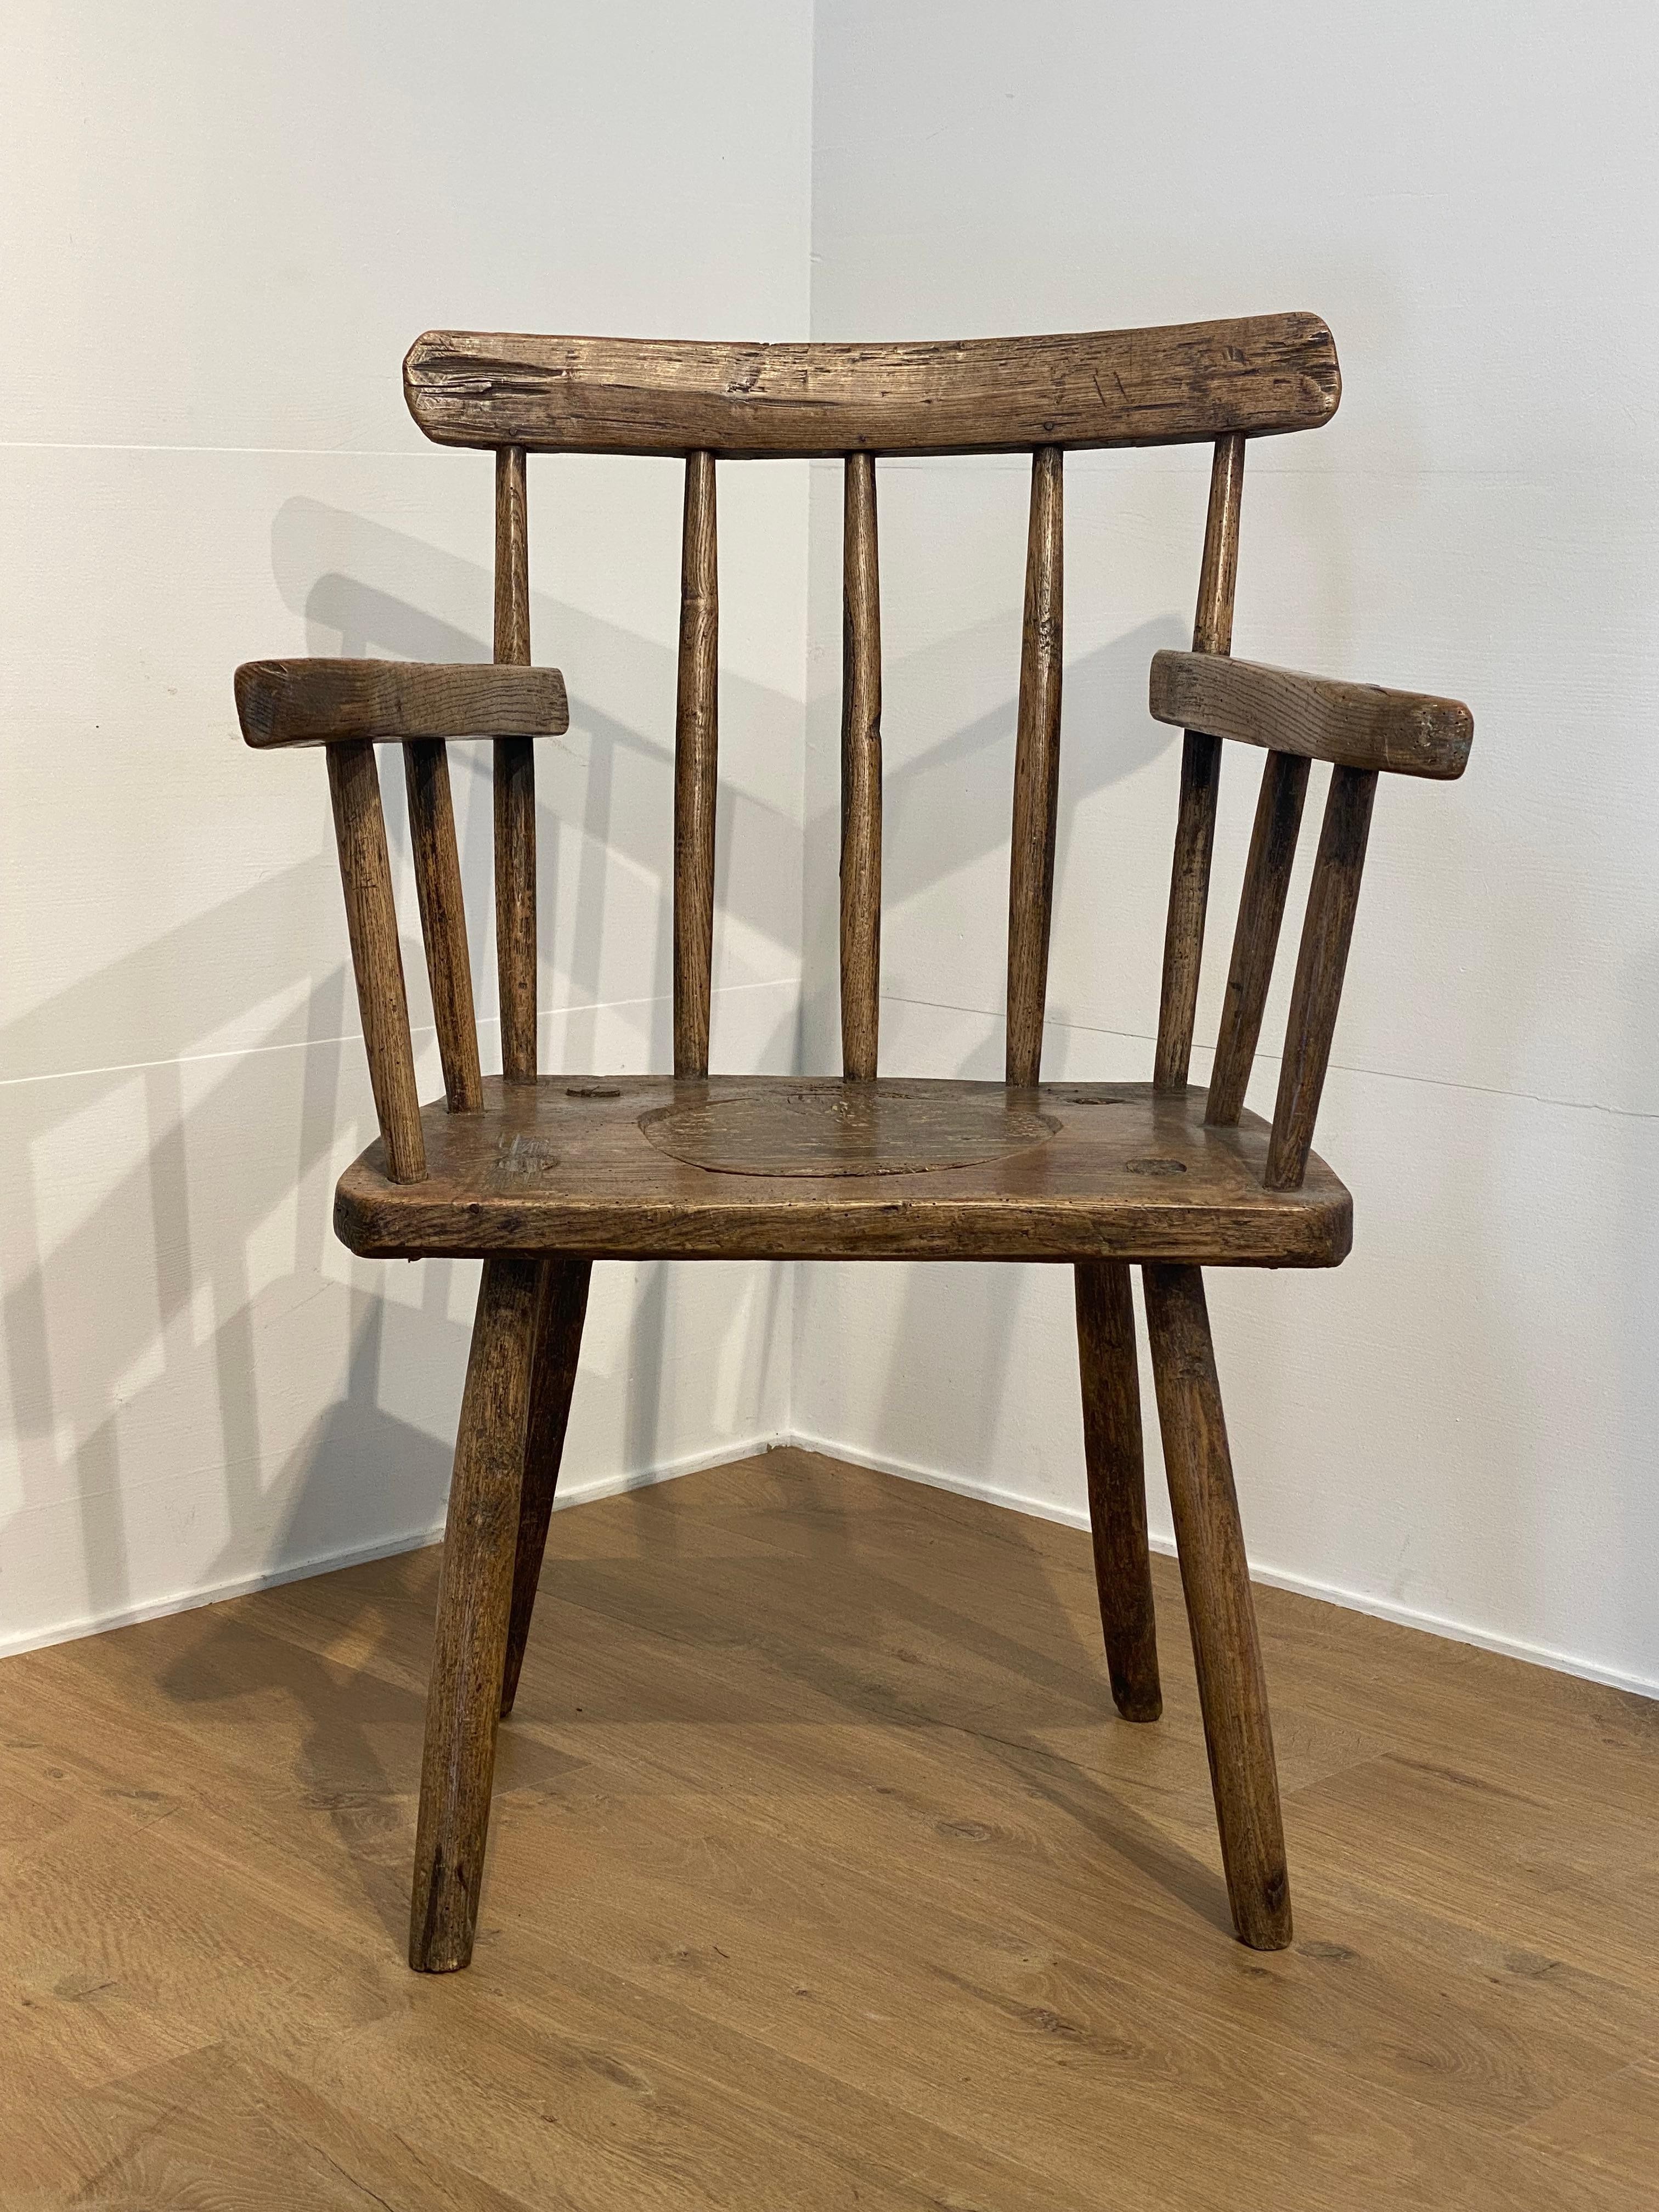 Elegant brutalist and antique wooden Chair from England,
19 th Century, very powerful but simple design,
good piece of furniture to combine with contemporary furniture,
warm and shiny shine of the wood